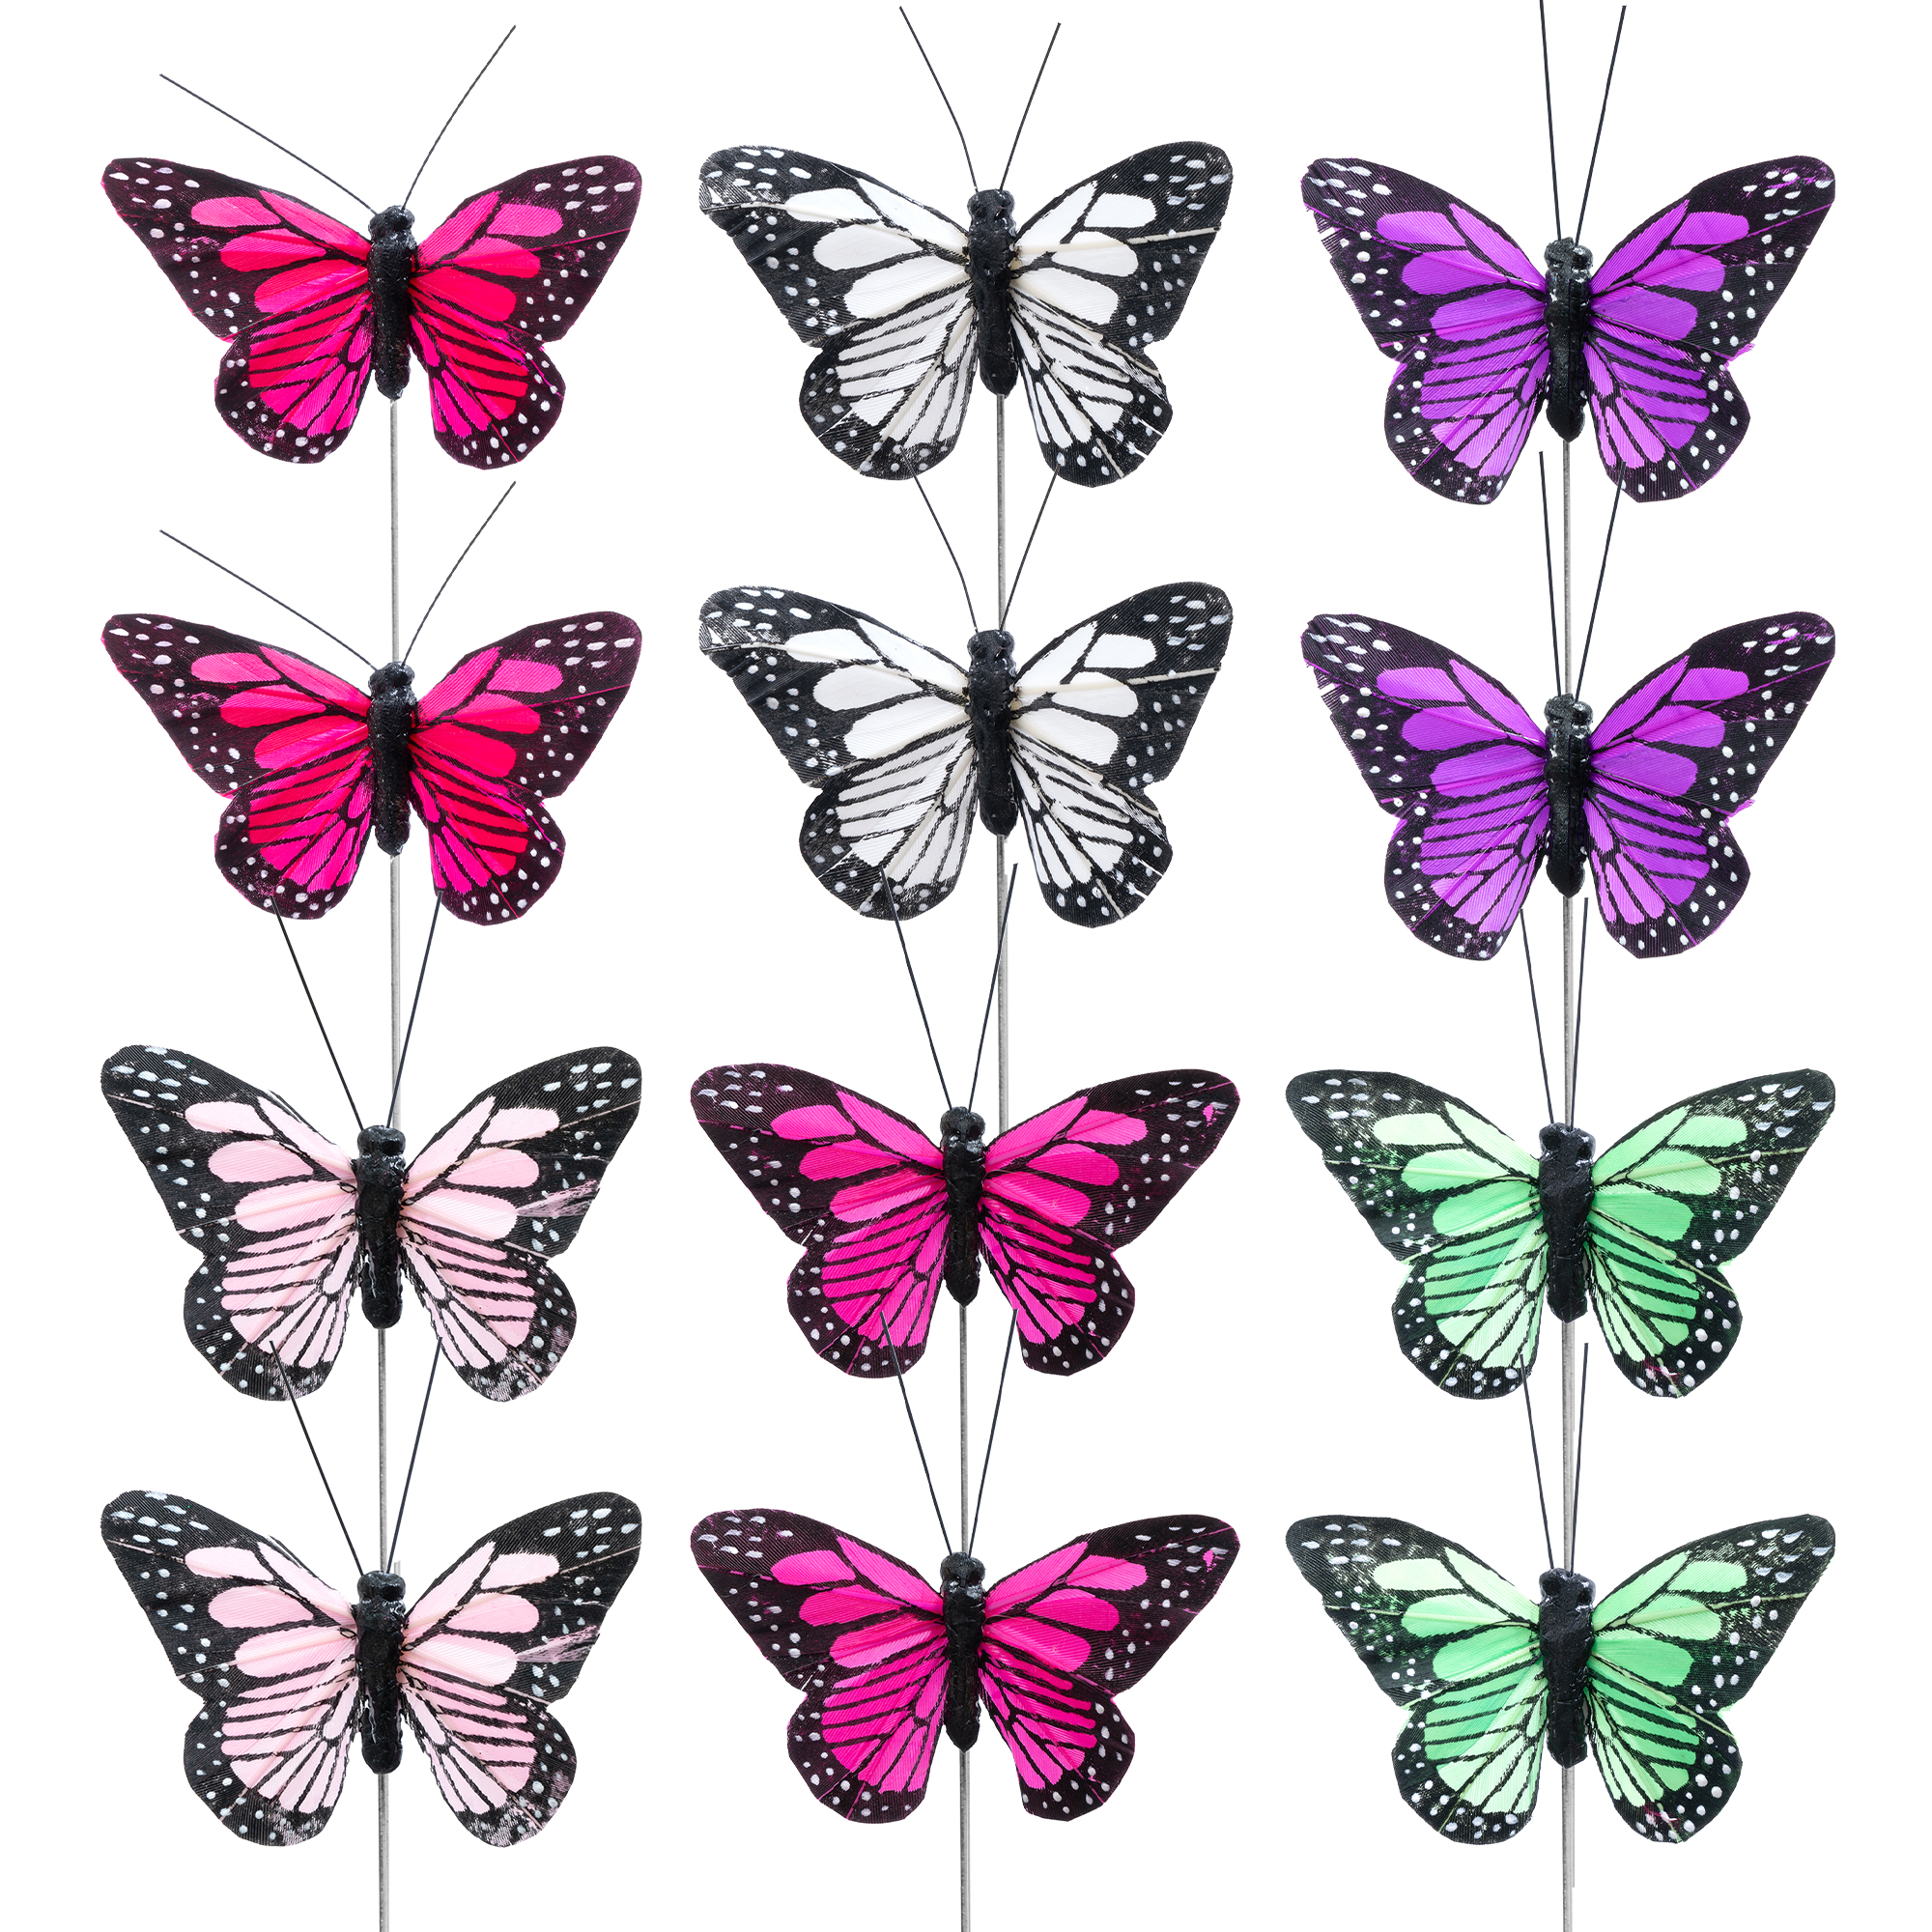 Feather Butterfly 2½" 12pc/box - Assorted